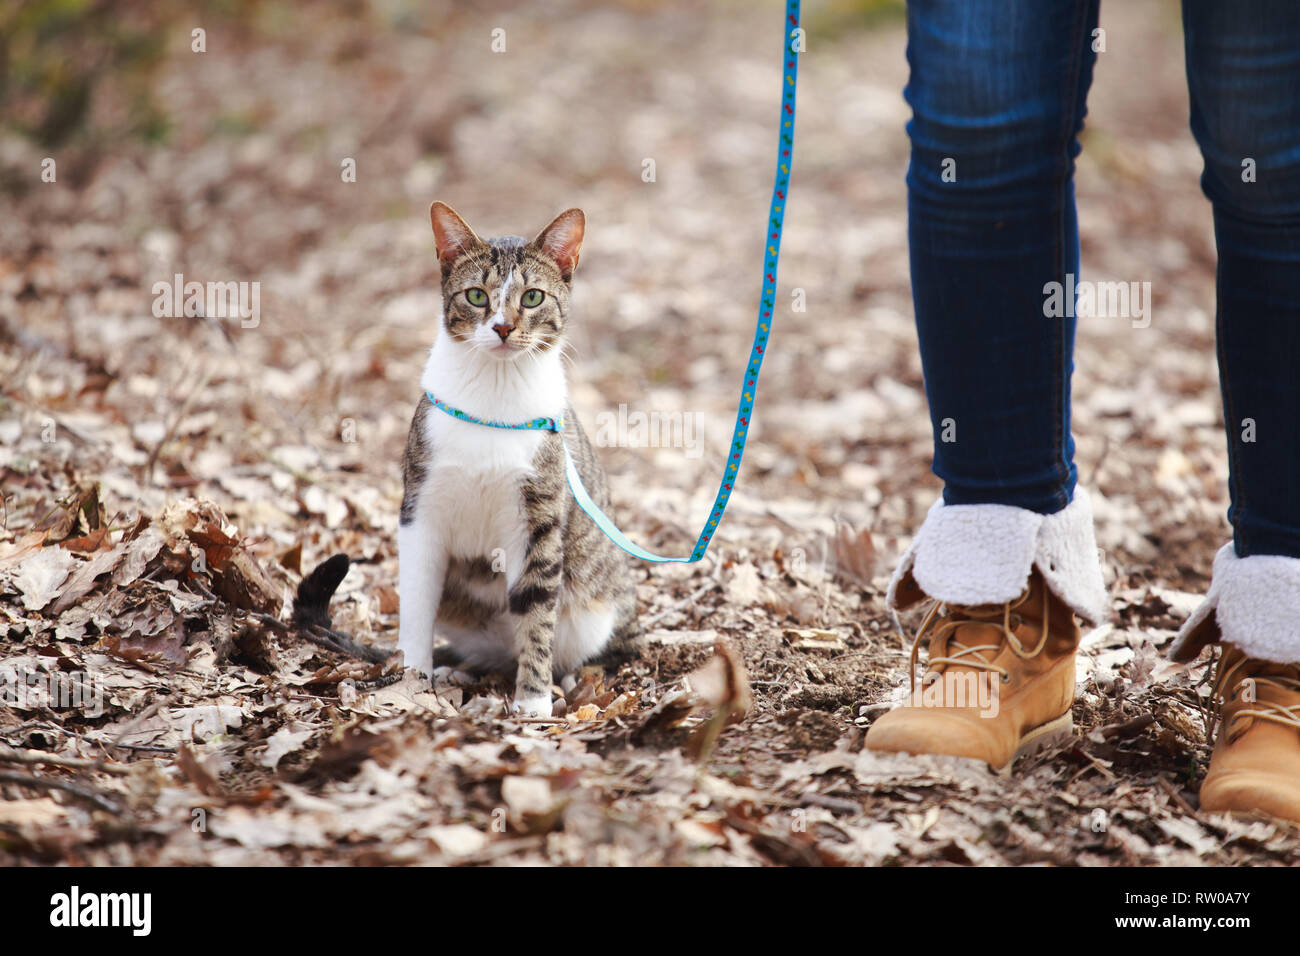 Woman owner walking  cat on a leash outdoors in nature Stock Photo